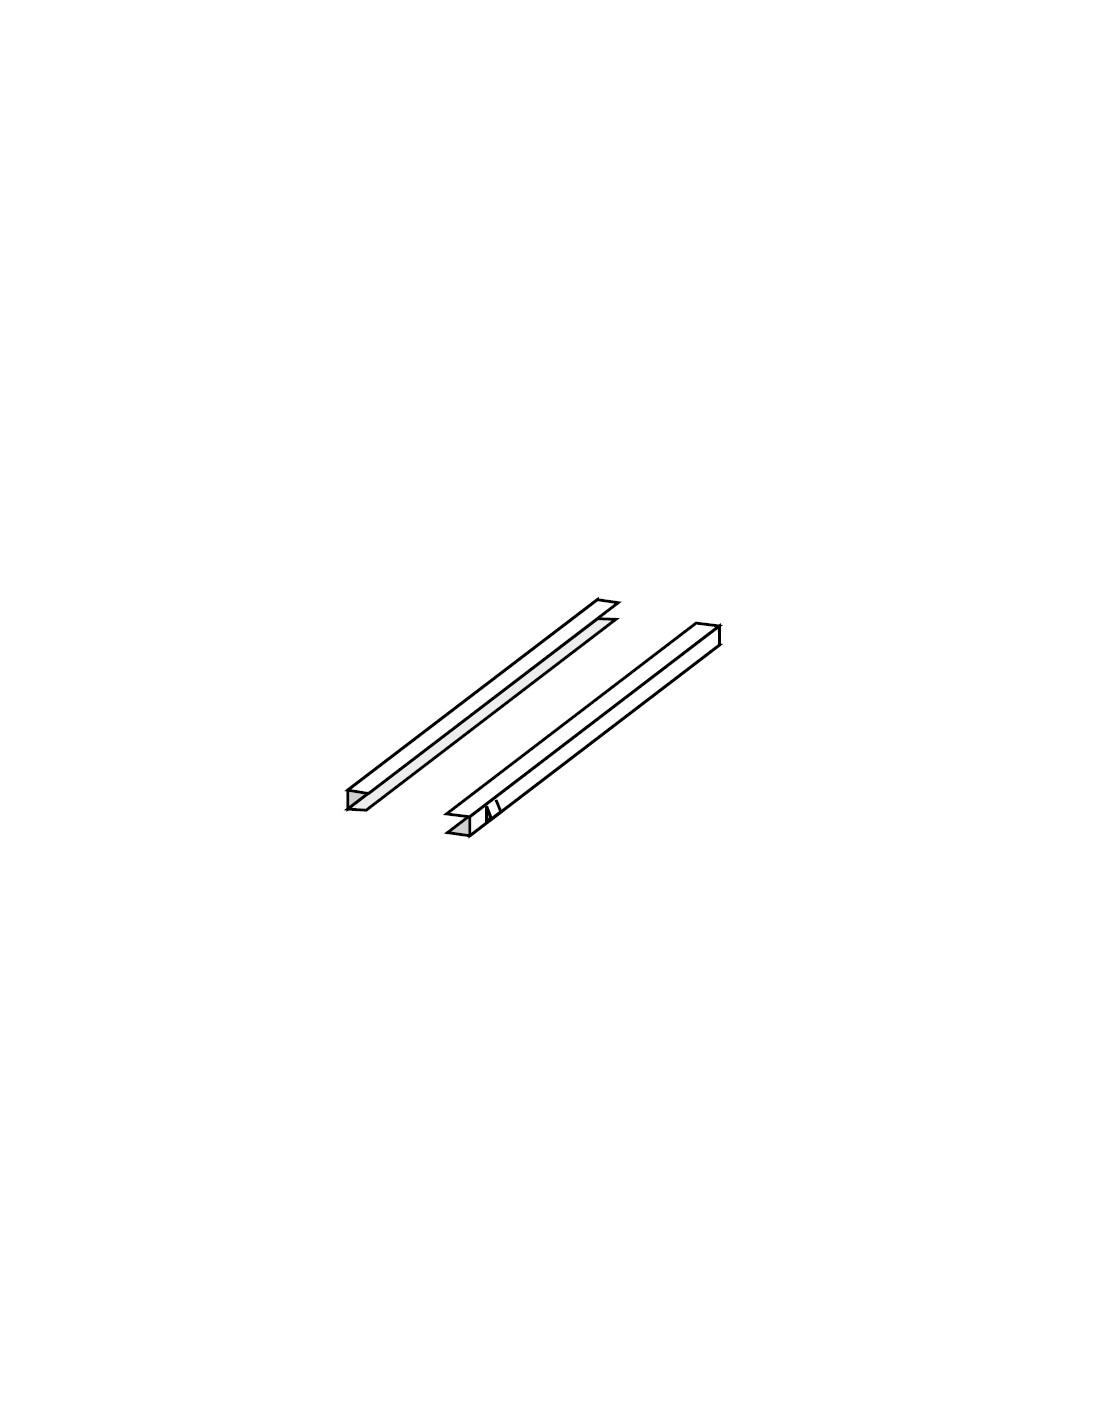 Pair of L530 stainless steel guides